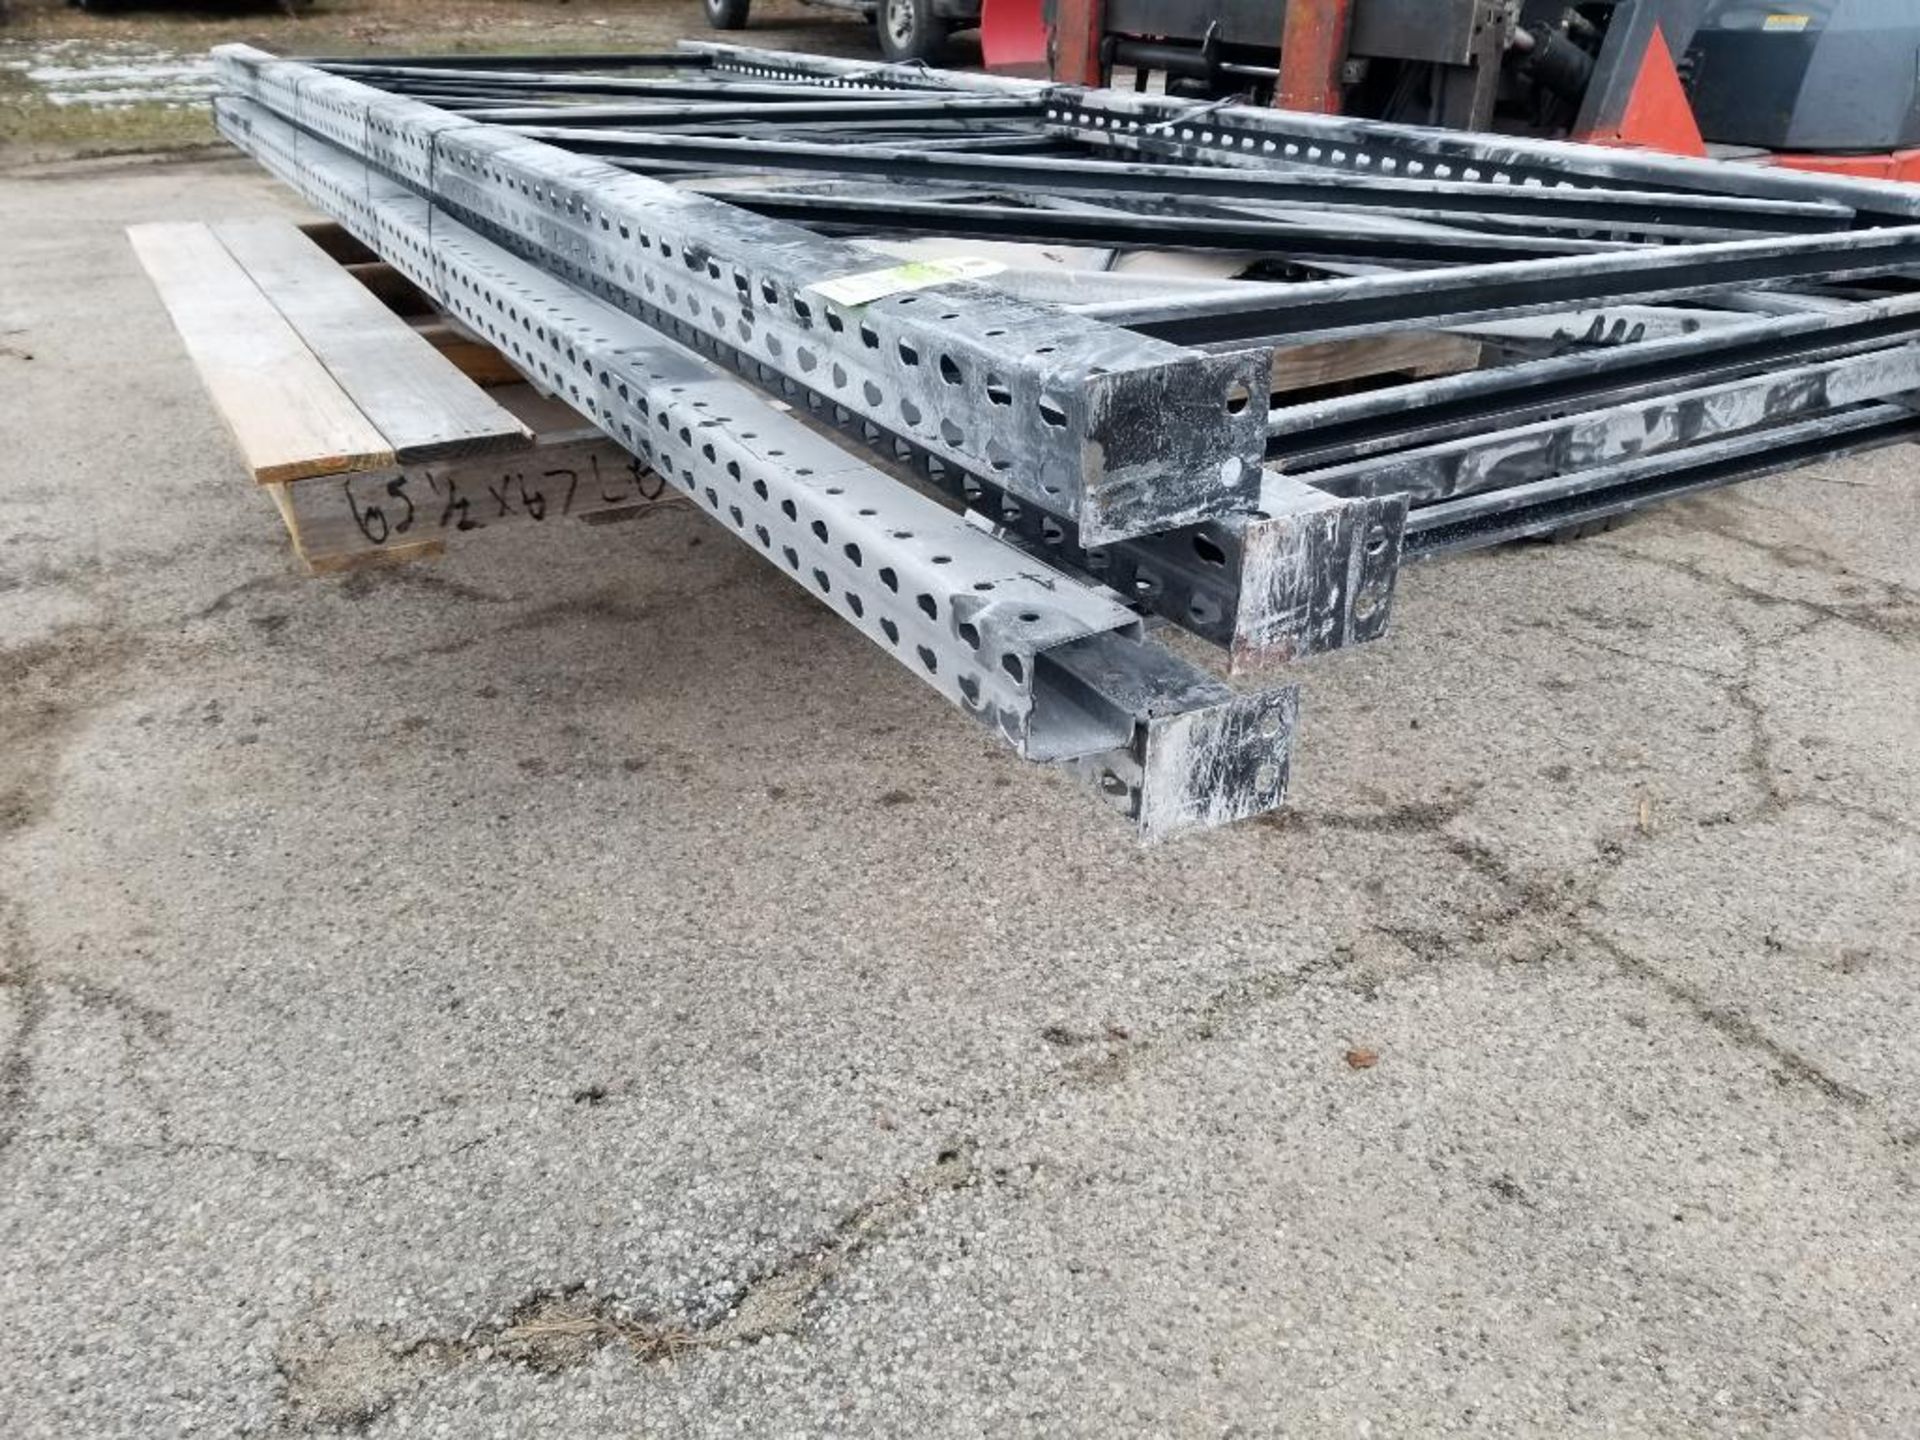 Qty 4 - Pallet racking uprights.Teardrop style. 144in tall x 48in wide. - Image 2 of 7